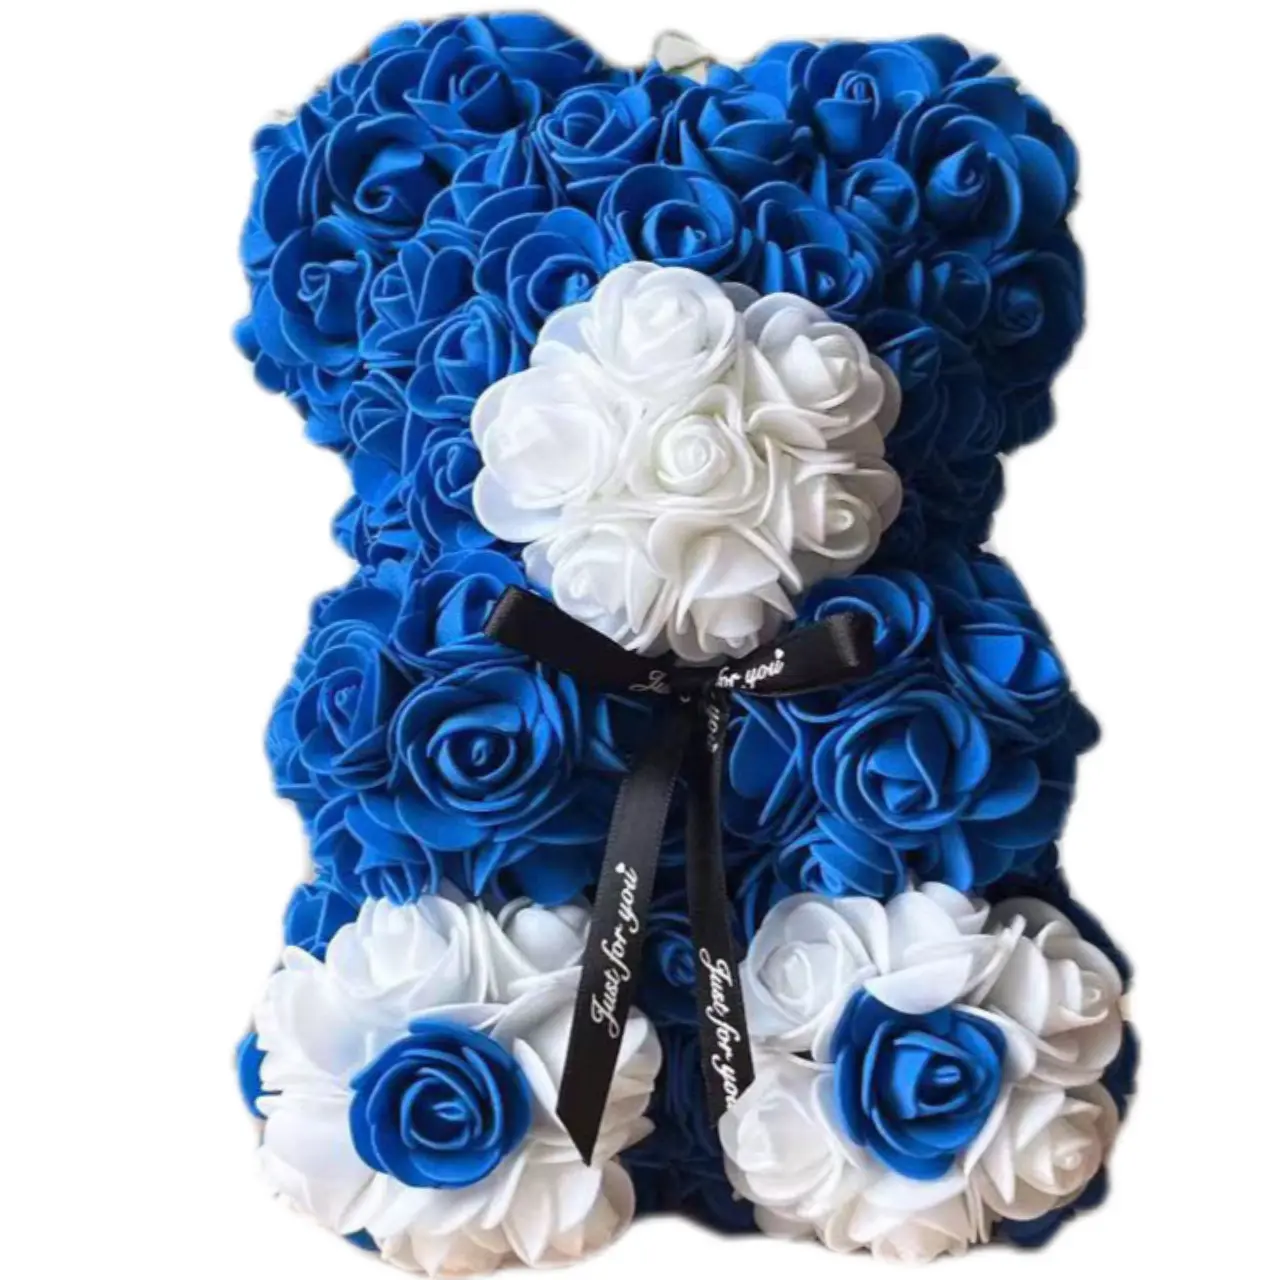 Hot Selling Good Quality Pure Handmade Artificial Foam Rose Teddy Bear Customized color For Mothers day Gifts